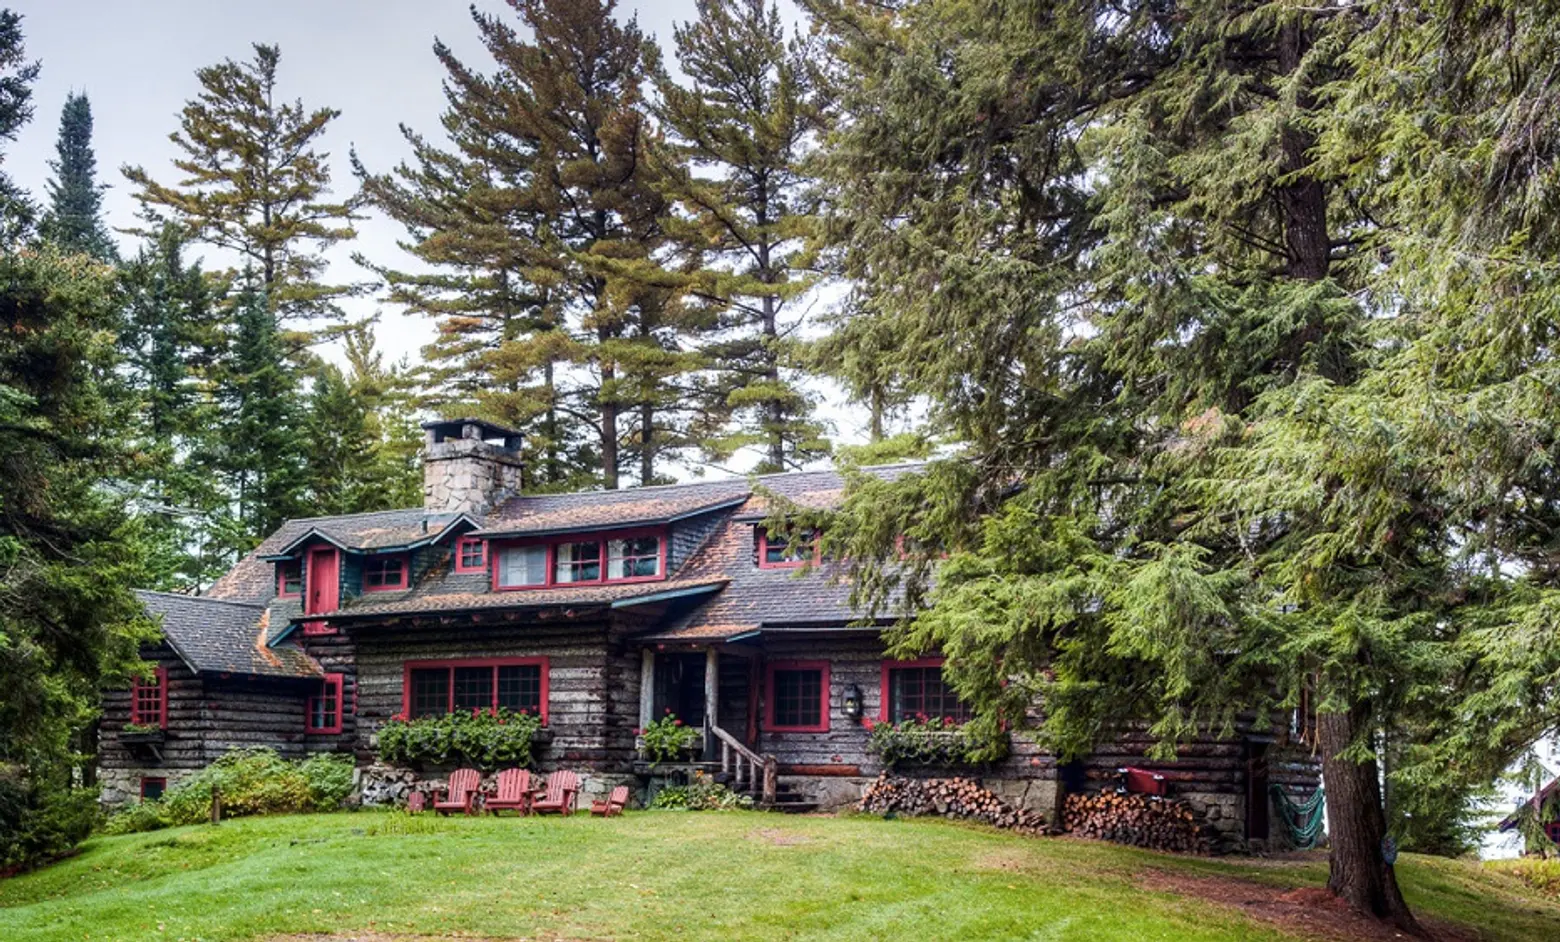 J.P. Morgan’s 120-year-old ‘Great Camp Uncas’ in the Adirondacks finally sells